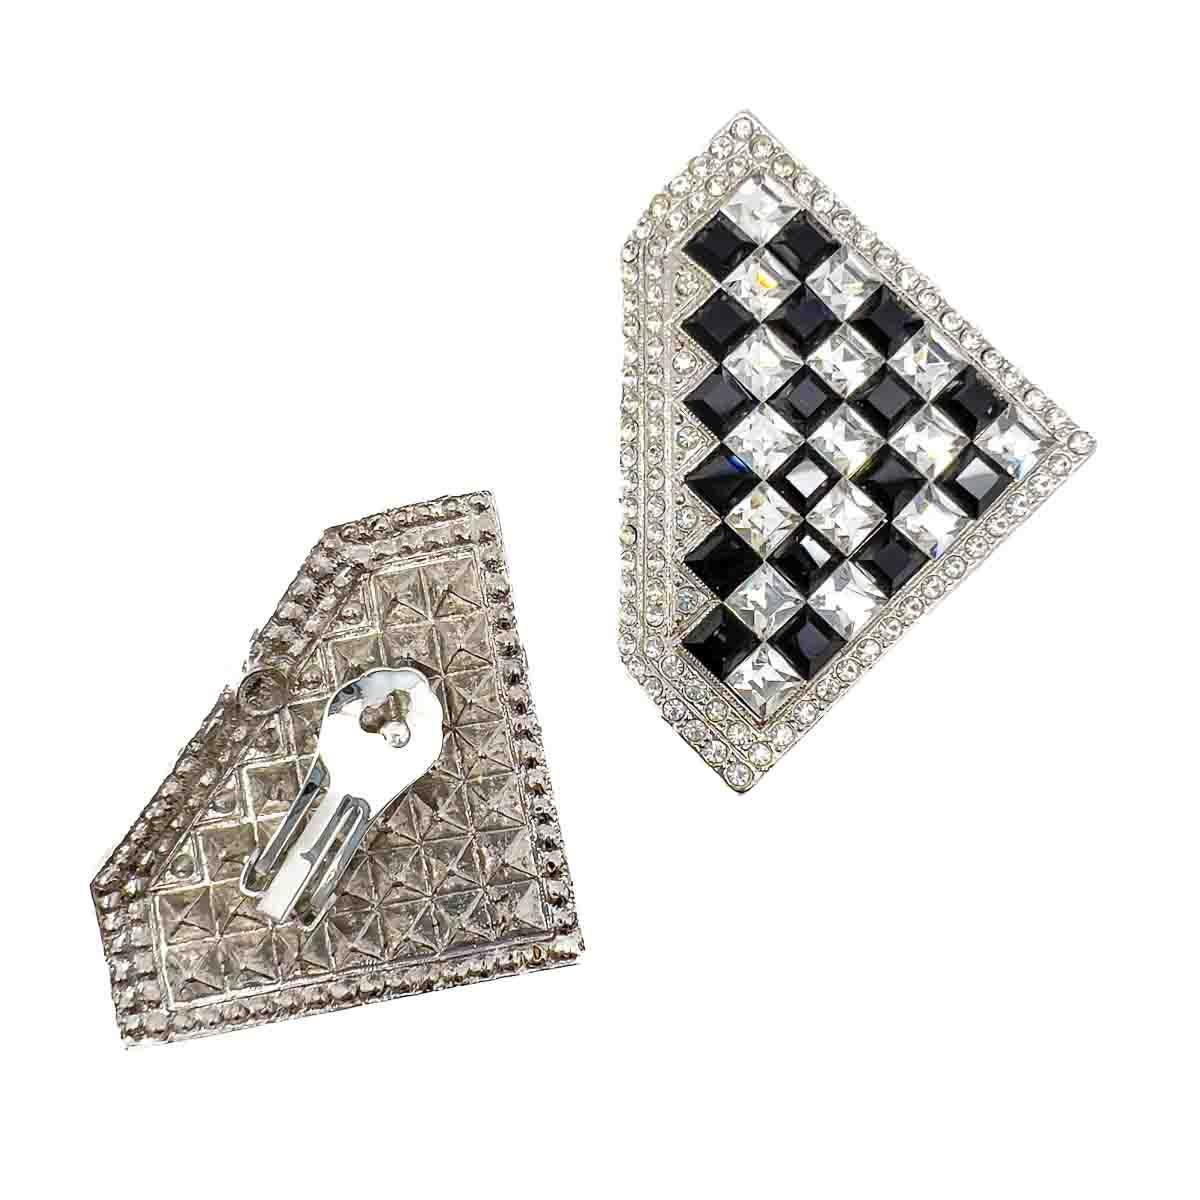 A striking pair of Vintage Butler & Wilson Checkerboard Earrings. Featuring square cut crystals in black and white. A striking style statement that is effortlessly glam.

Butler and Wilson began in 1969 selling antique jewellery in Antiquarius on